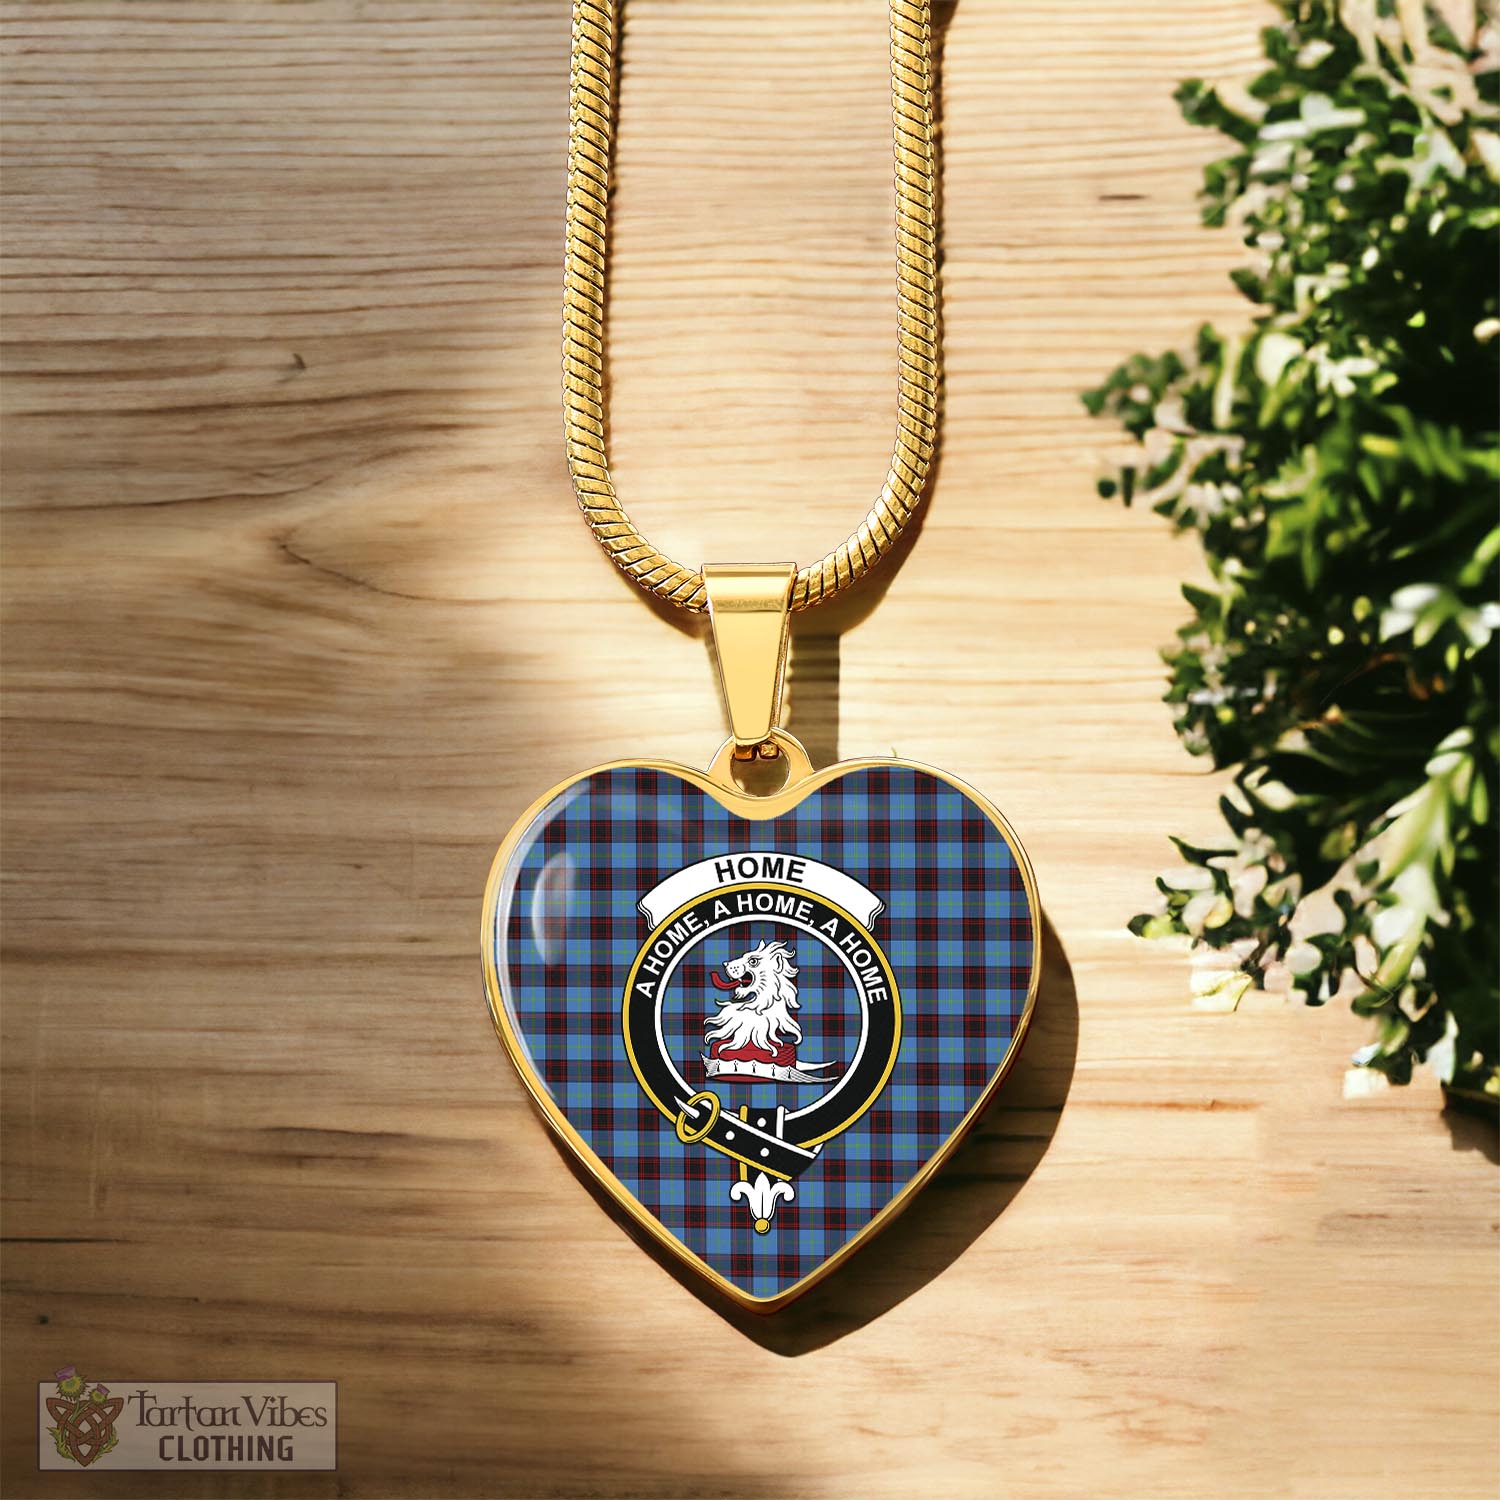 Tartan Vibes Clothing Home Ancient Tartan Heart Necklace with Family Crest